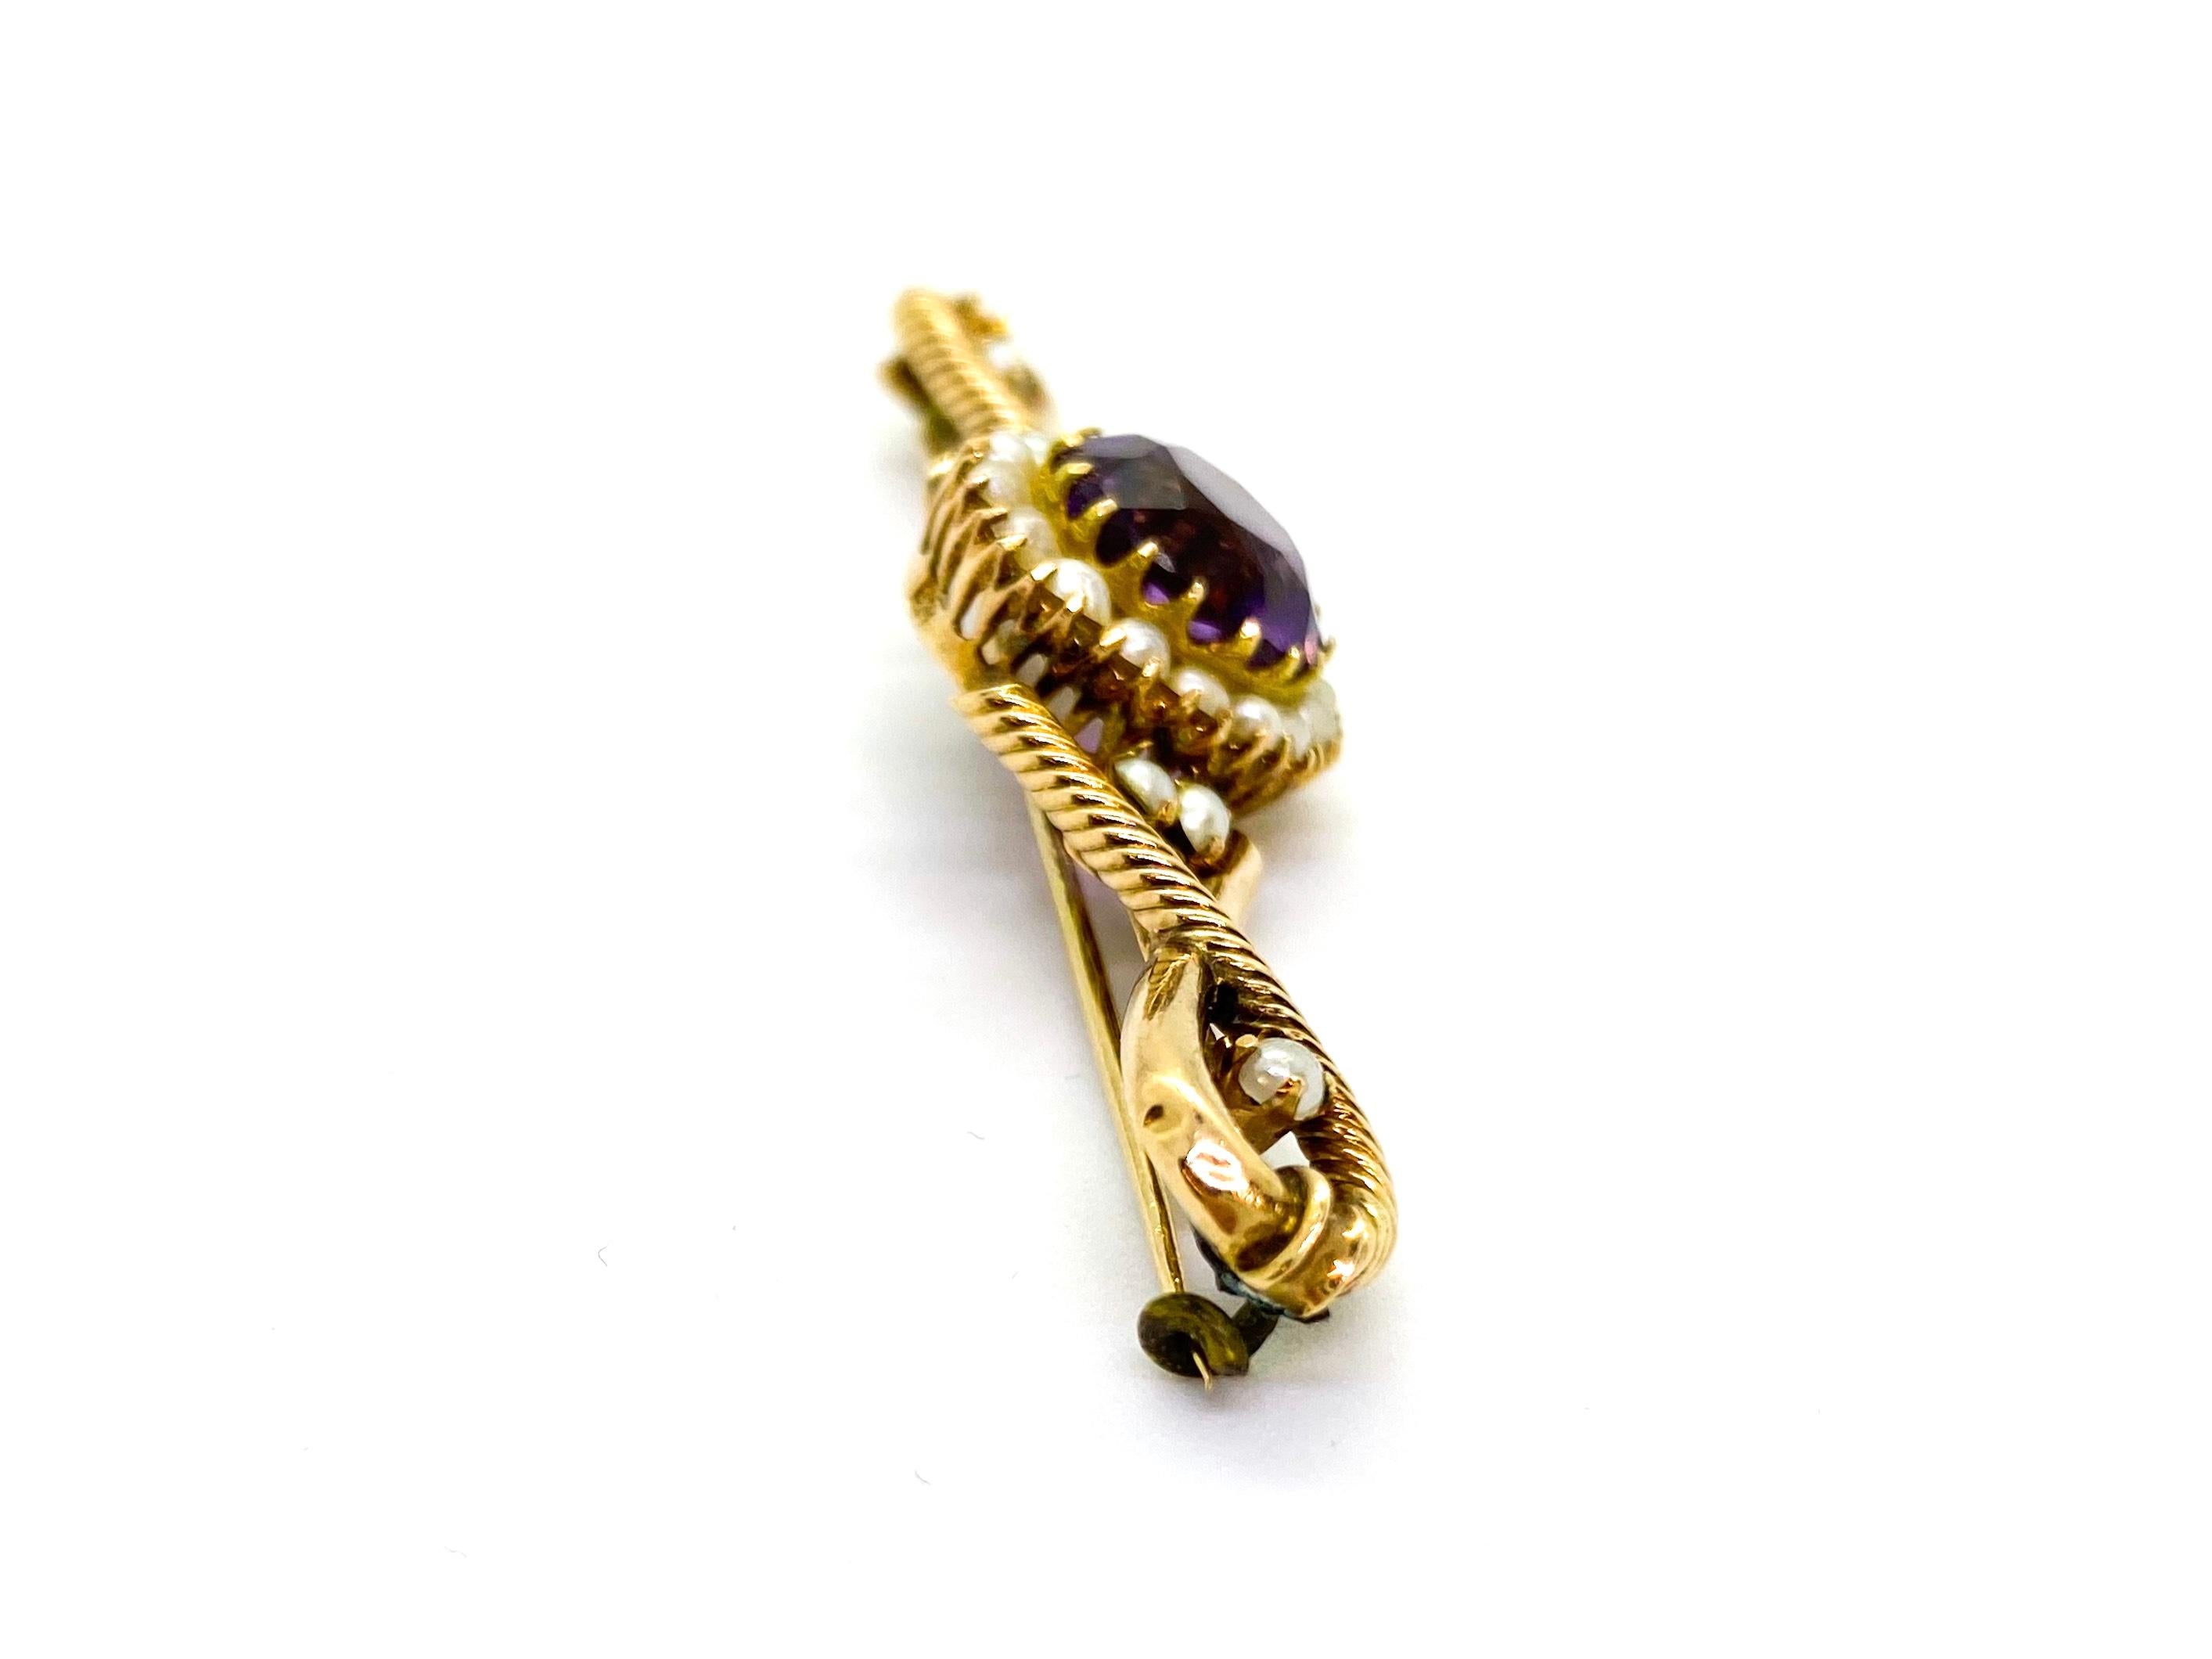 14 Carat Yellow Gold Amethyst Pearls Russia Brooch
14k Russian Gold Stamp 56
Width 1.5cm, Lenght 5.8cm, Depth 1.1cm
Some tin reipairs